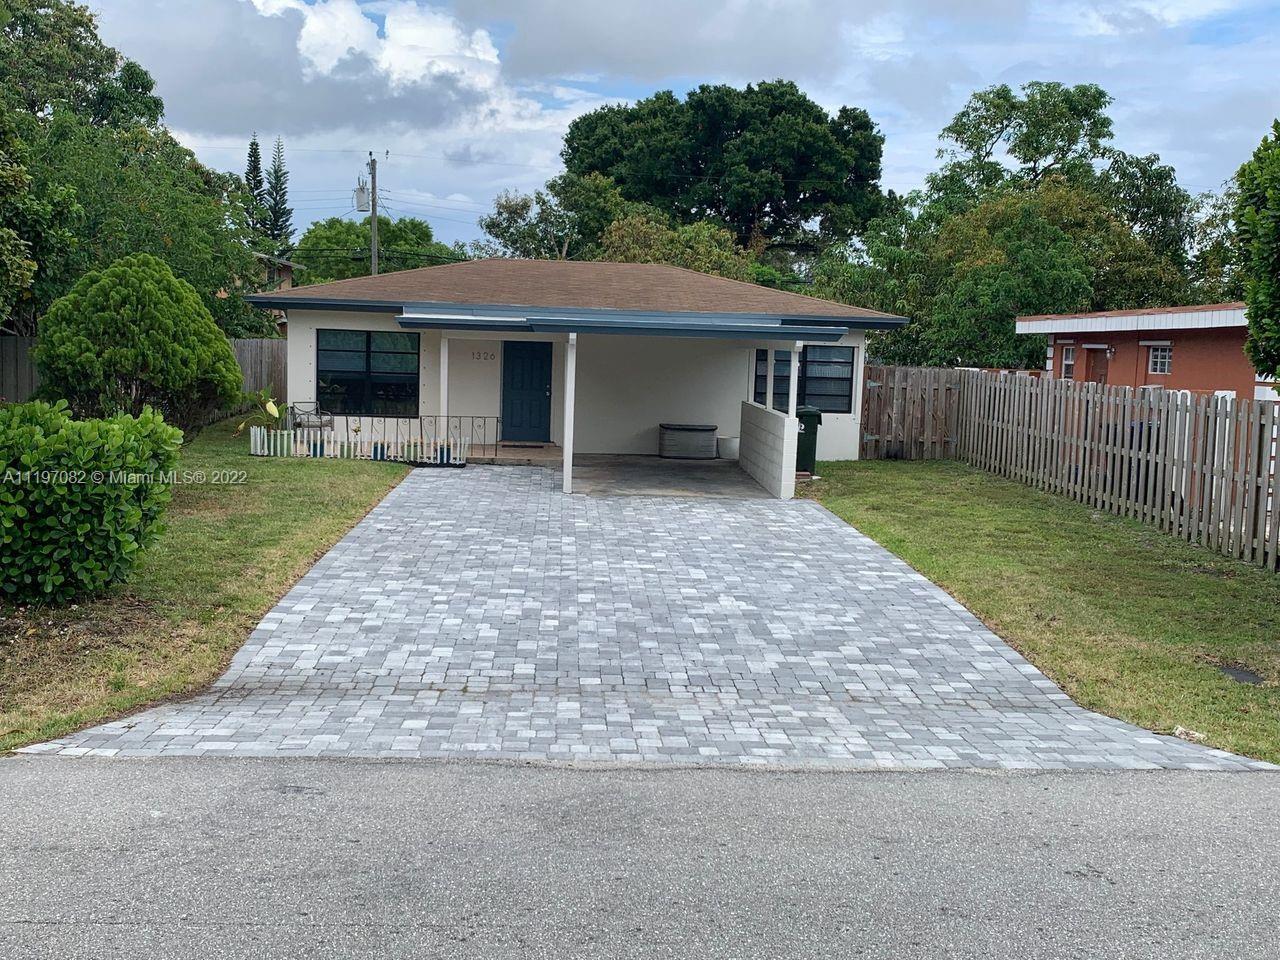 VERY NICE 3 BEDROOM 2 BATH SINGLE FAMILY HOME. PROPERTY FEATURES STAINLESS STEEL APPLIANCES, GRANITE